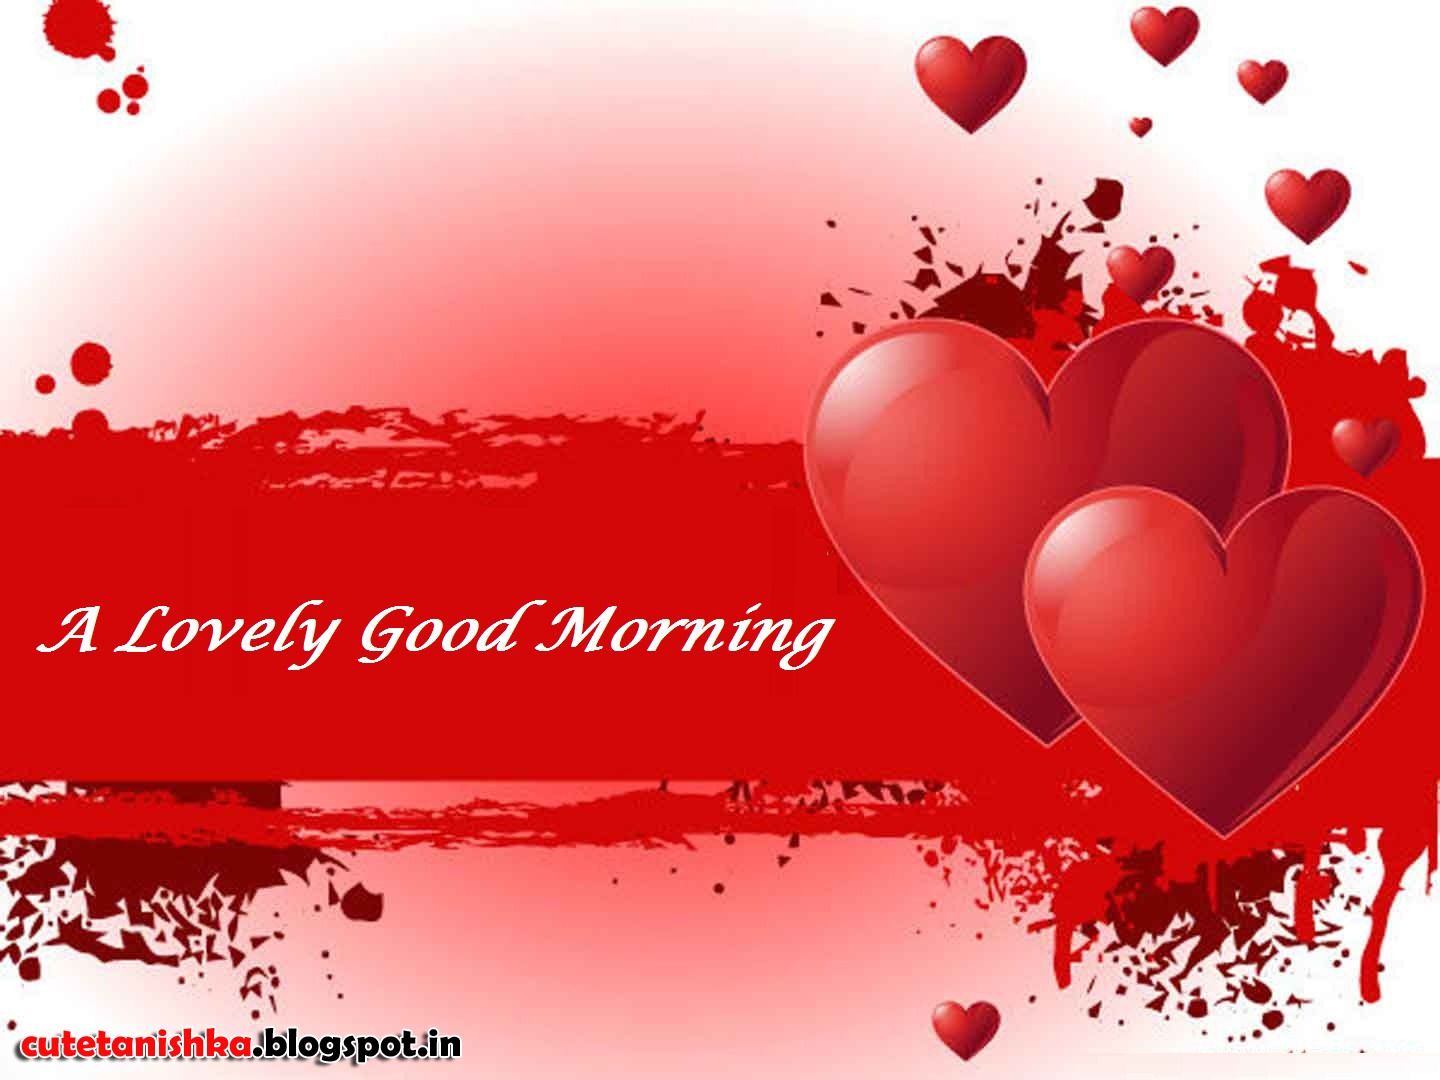 Lovely Good Morning Greetings Wallpaper Good Morning Wishes Images